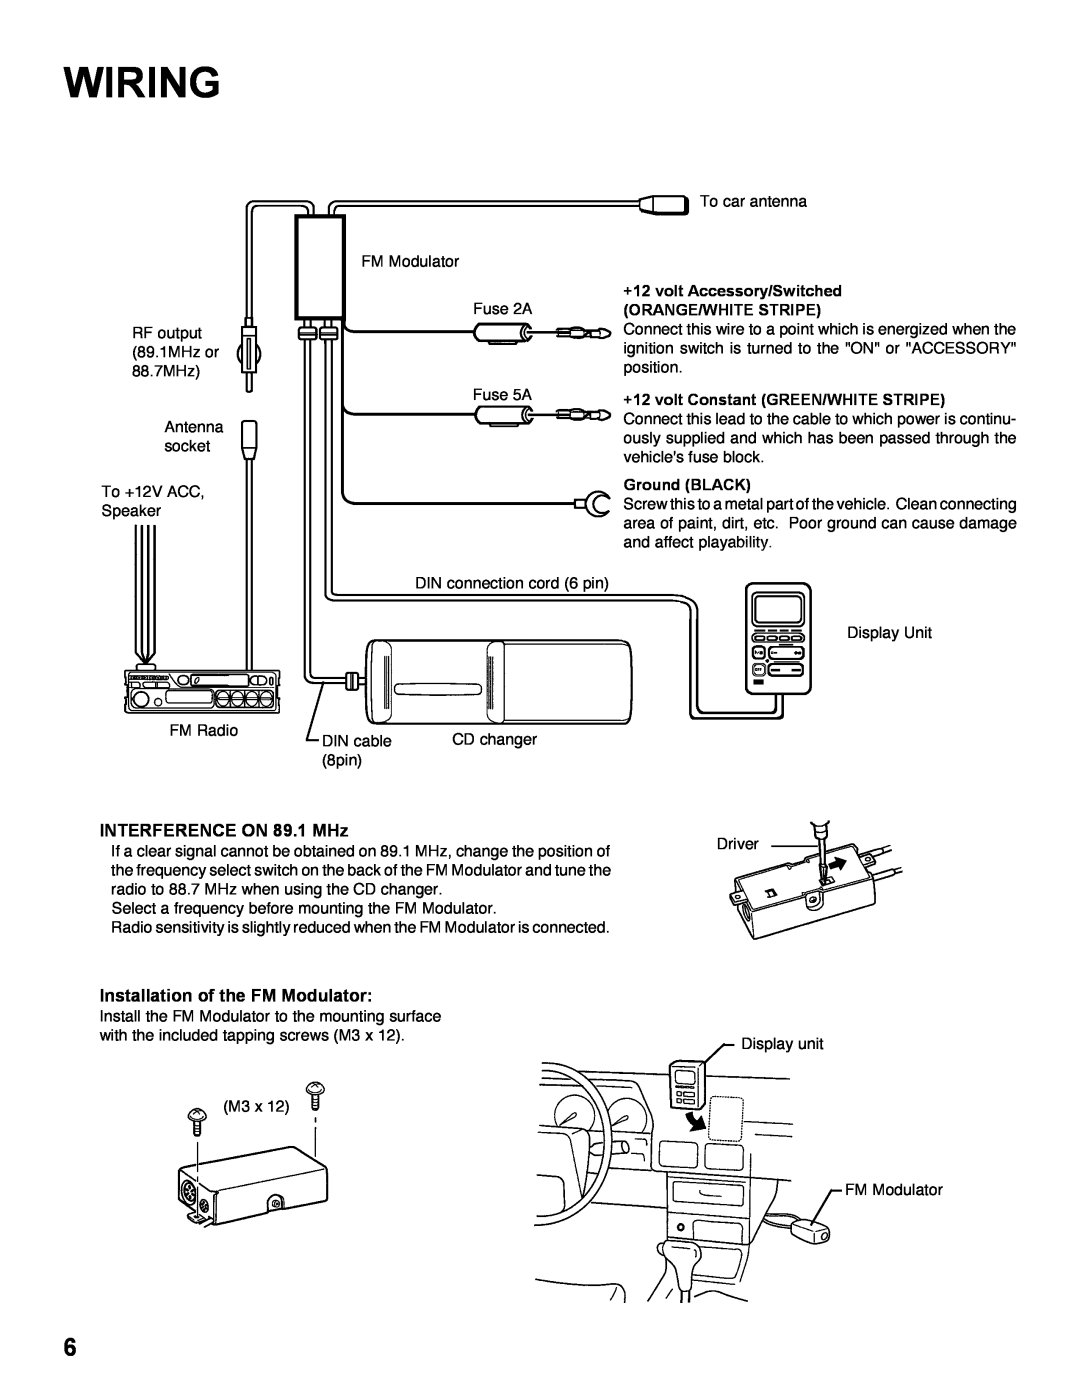 Shopsmith none installation manual Wiring, INTERFERENCE ON 89.1 MHz, Installation of the FM Modulator 